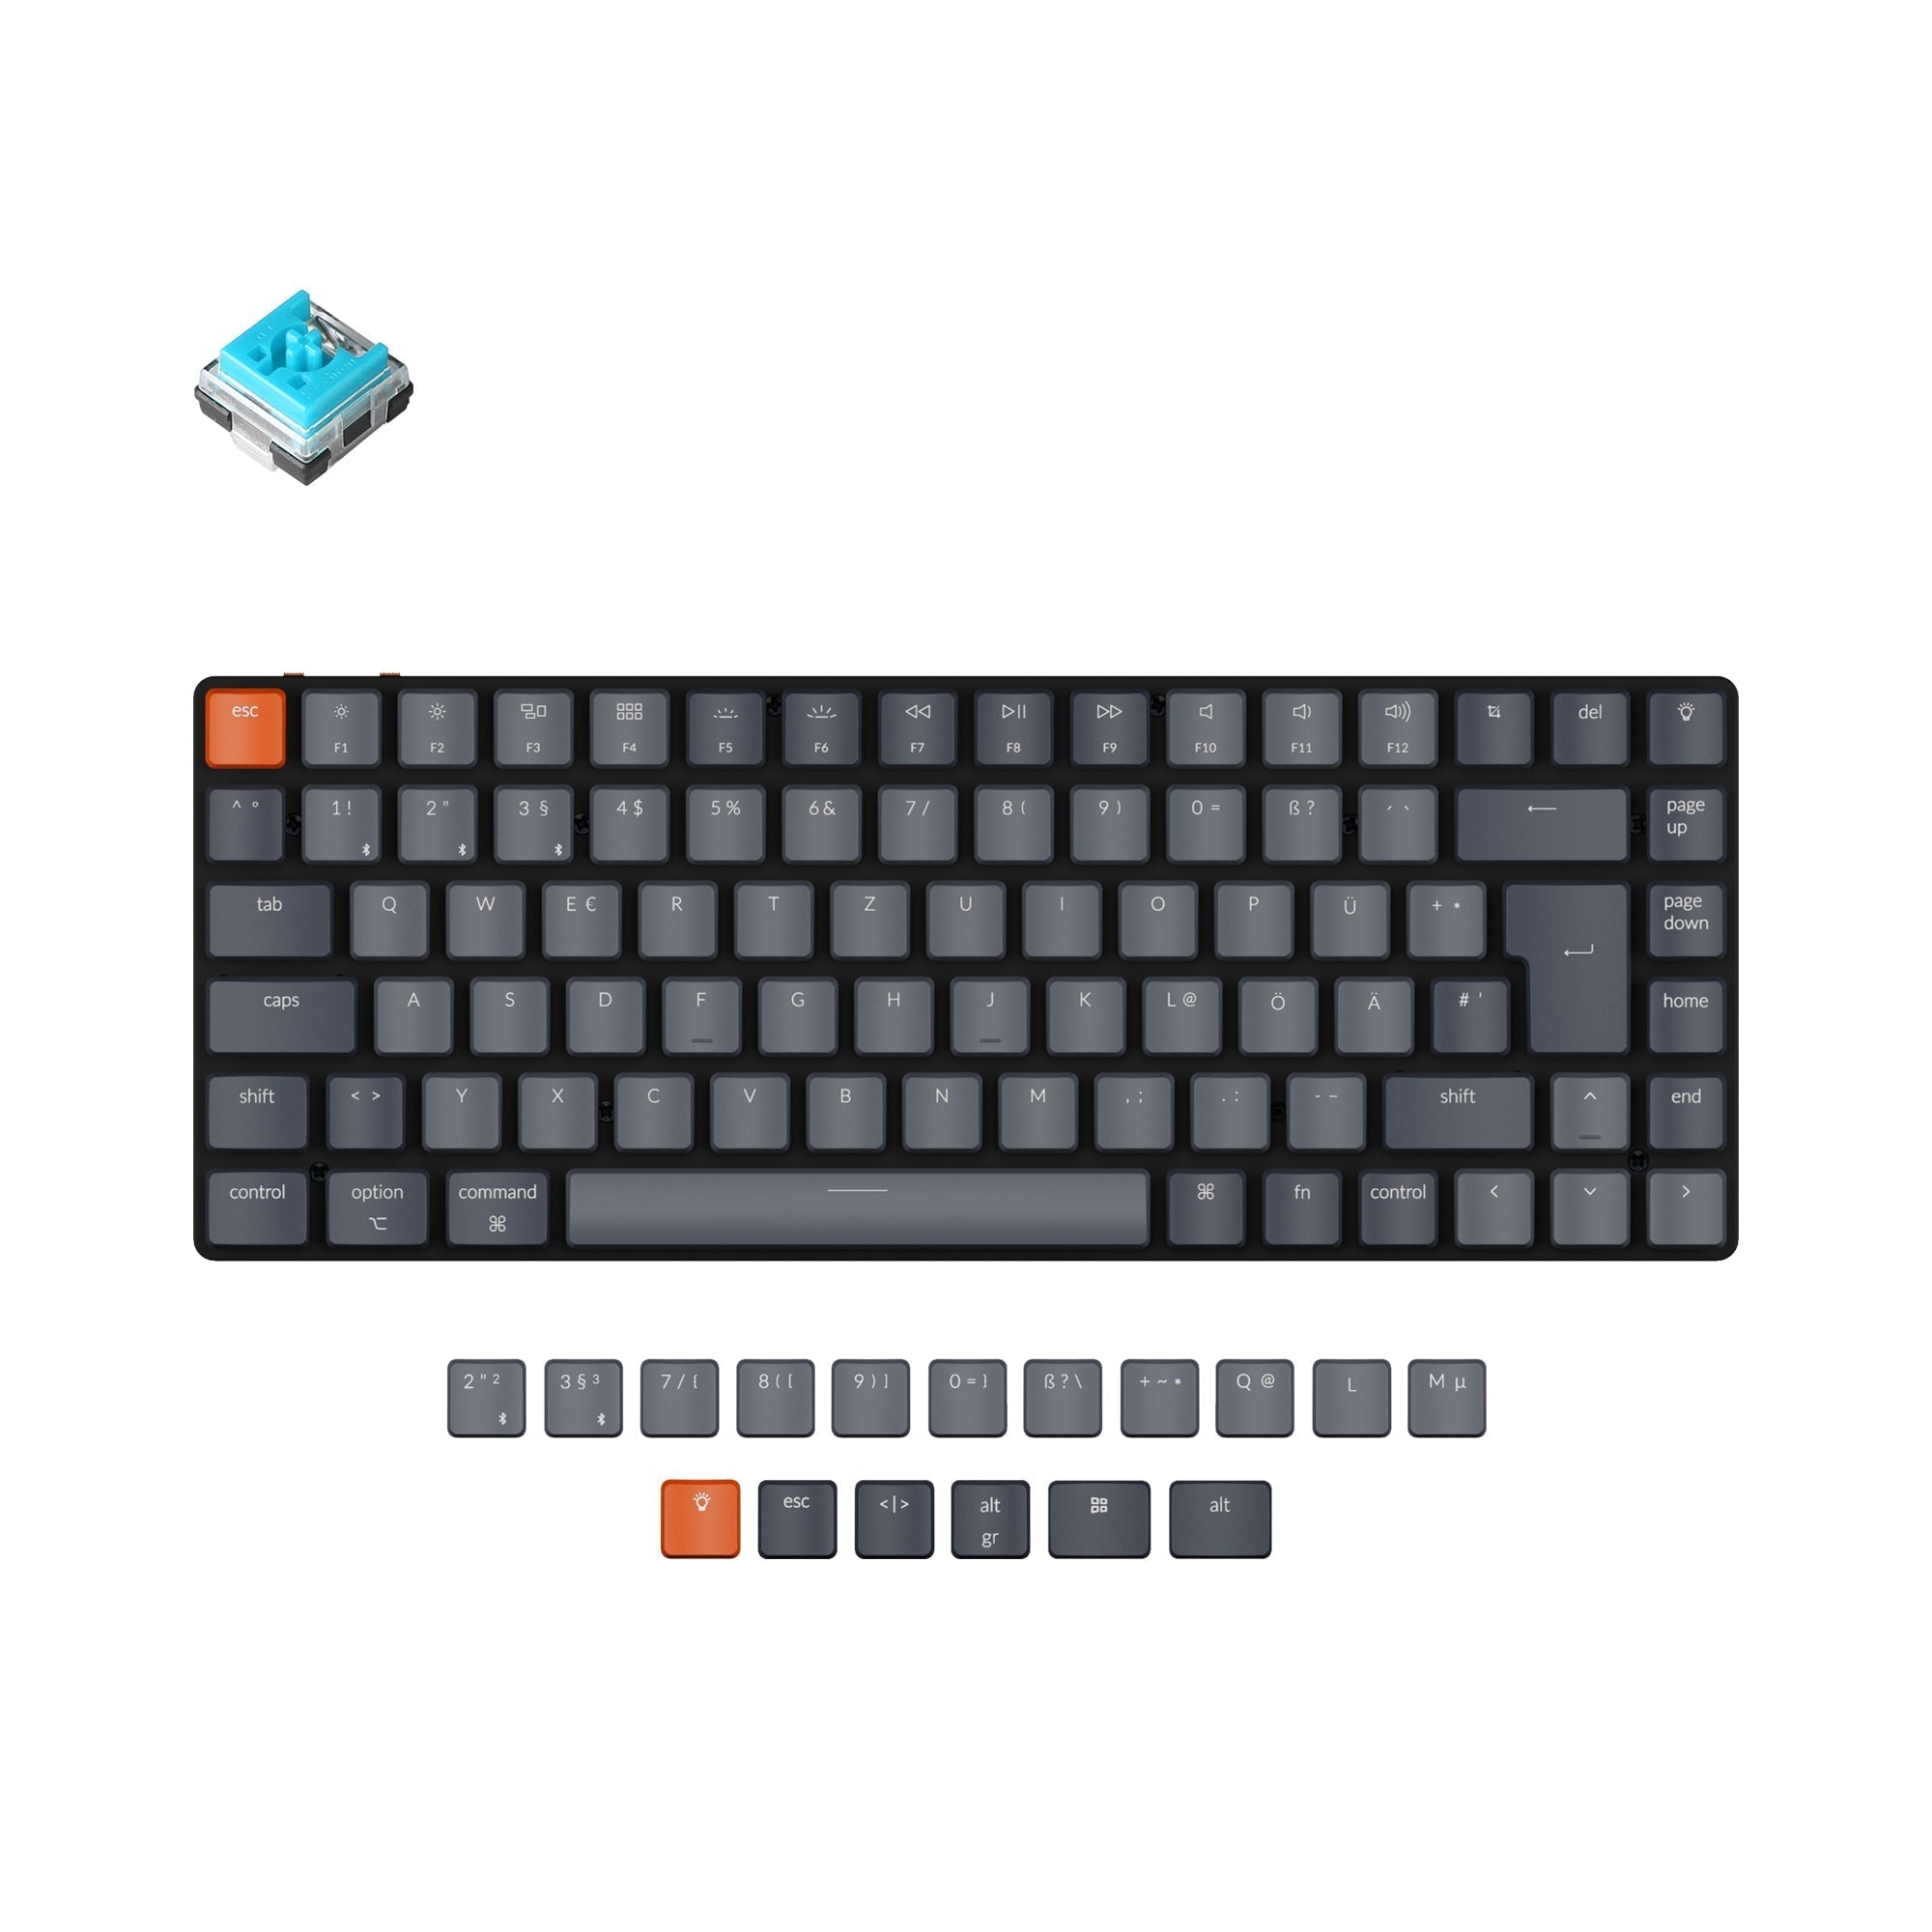 Keychron K3 ultra slim Hot swappable wireless mechanical keyboard Mac Windows iOS Android White backlight aluminum frame low profile Keychron Optical switch blue de iso layout